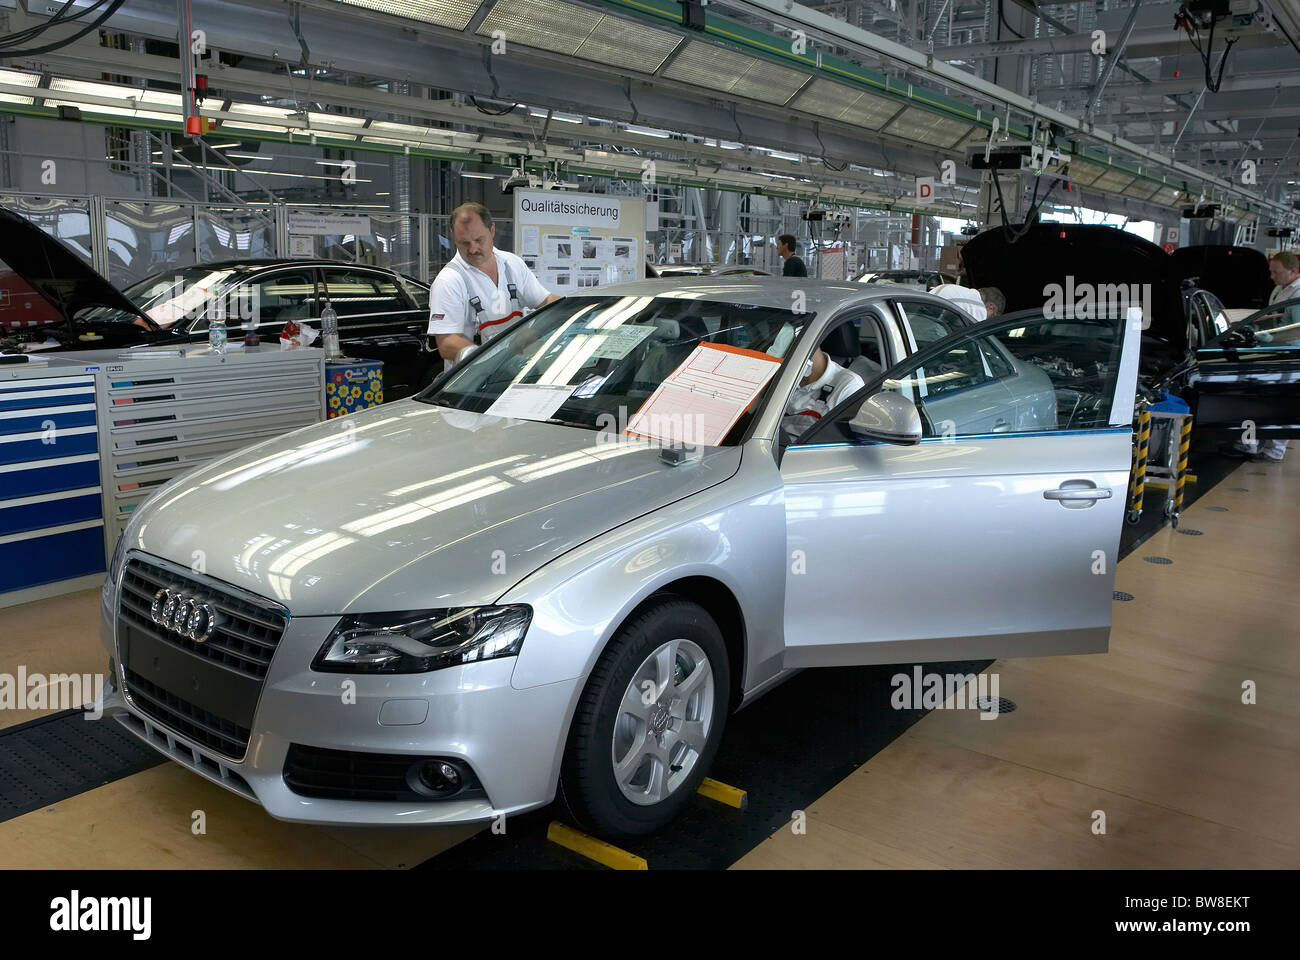 AUDI AG, testing centre of A4 and A6 car models, Neckarsulm, Germany Stock Photo